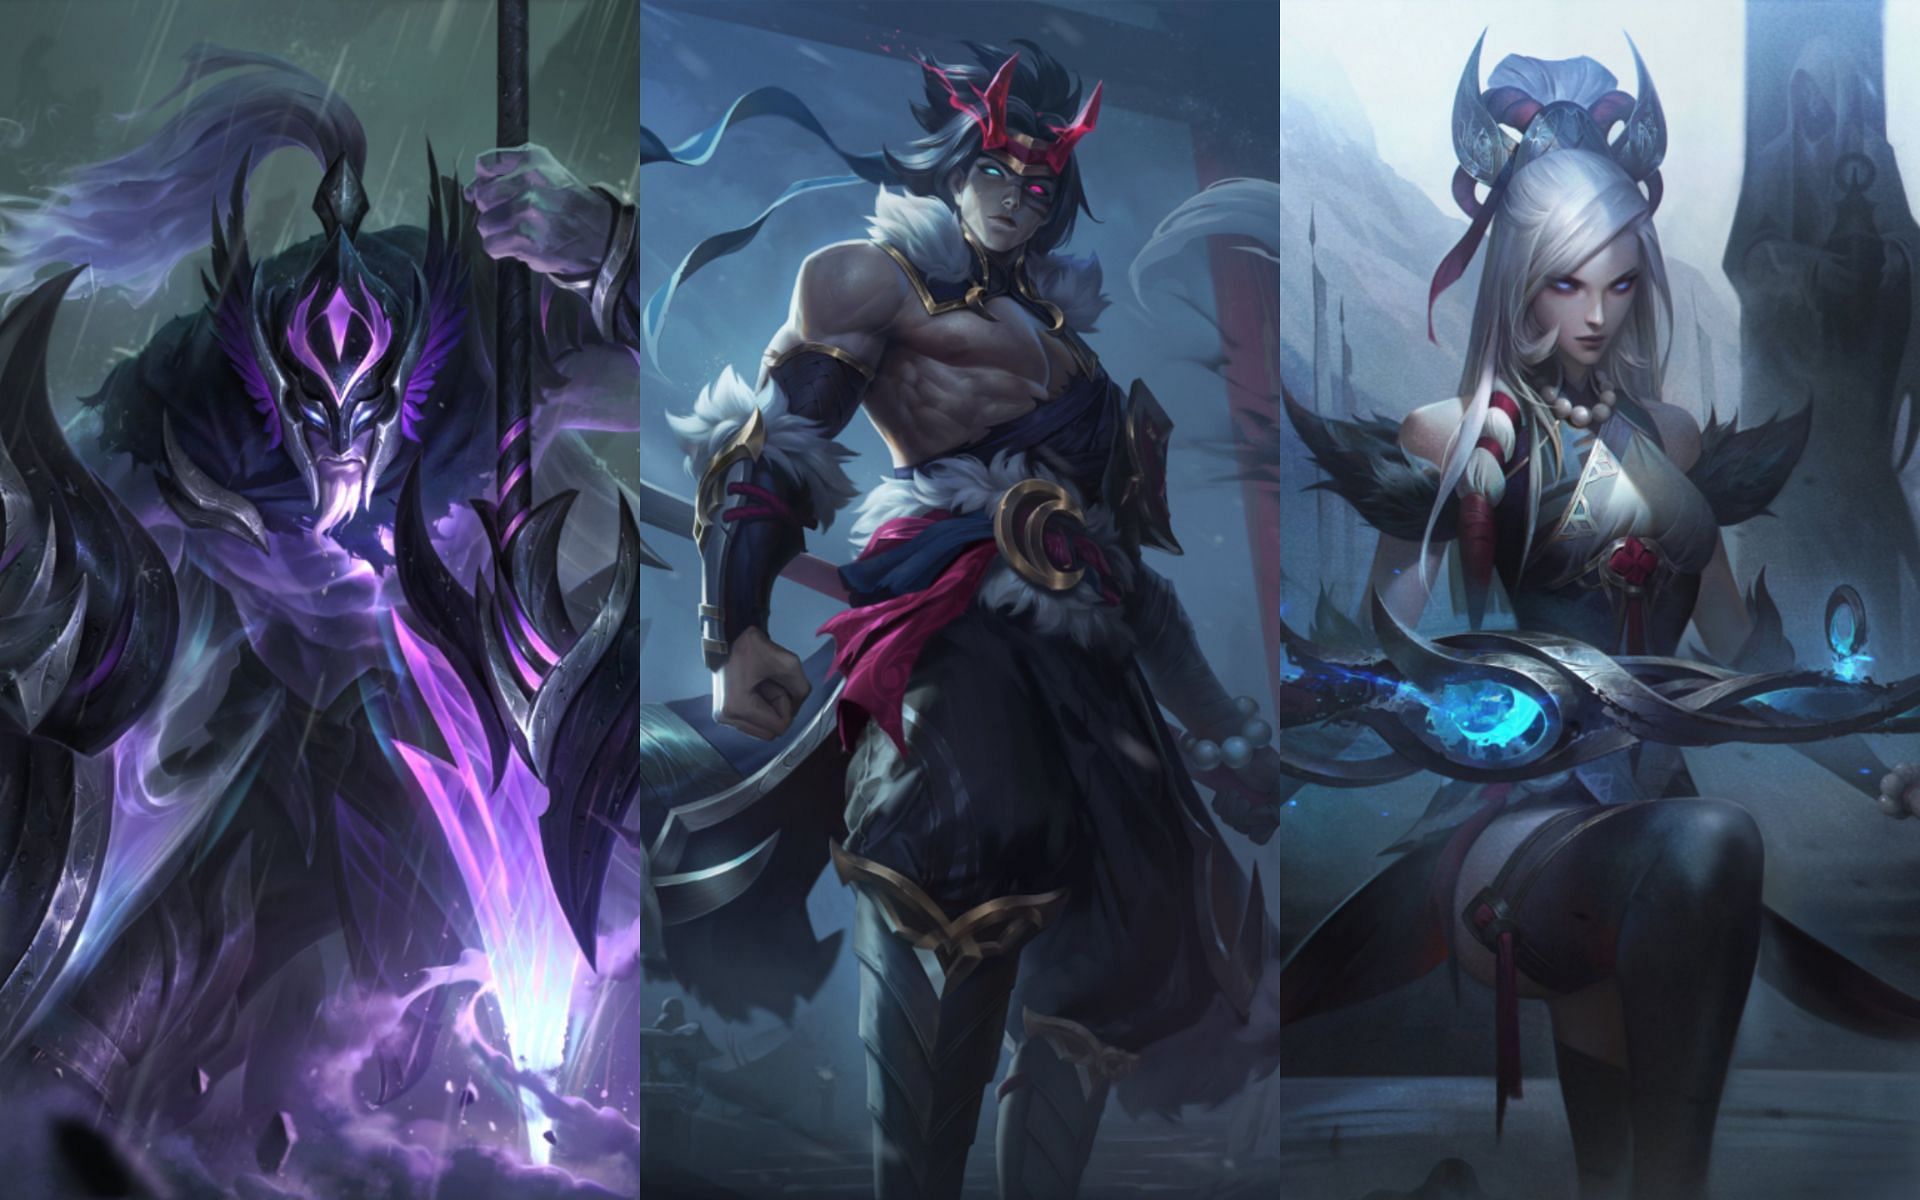 Snow Moon and Ashen Knight Pantheon is set to arrive soon within the game (Image via League of Legends)